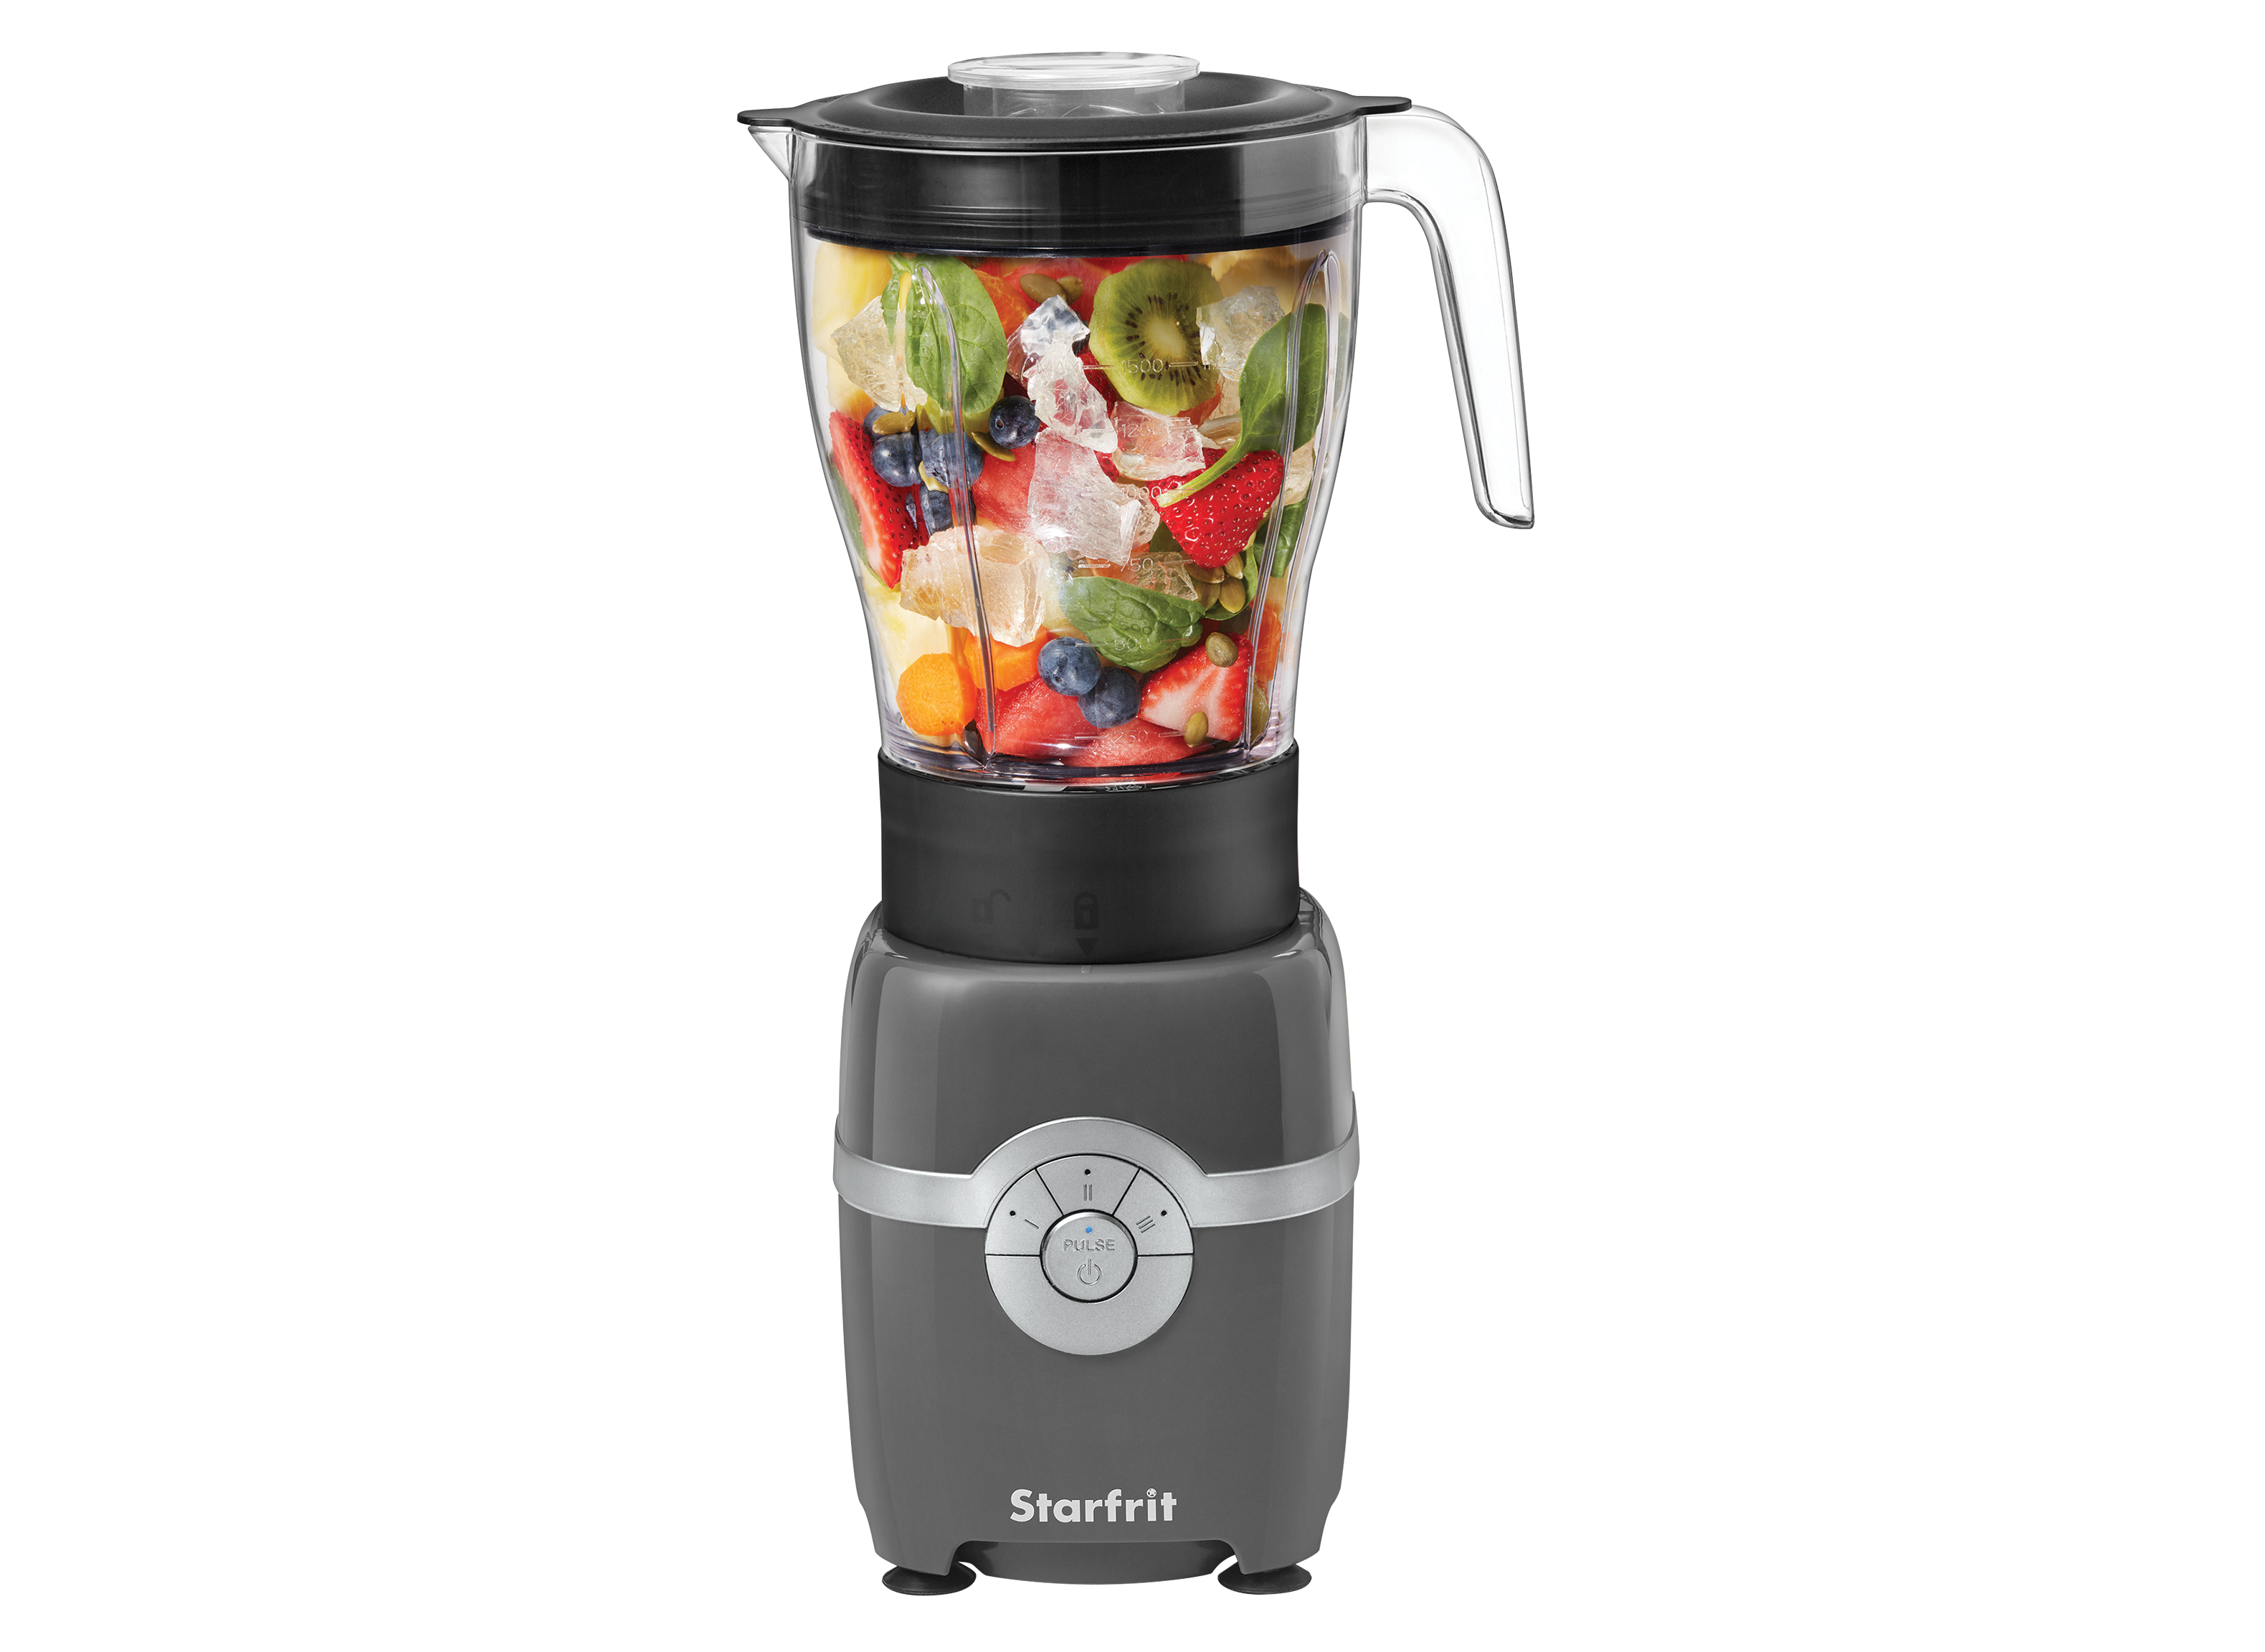 https://crdms.images.consumerreports.org/prod/products/cr/models/404967-full-sized-blenders-starfrit-high-powered-10023860.png